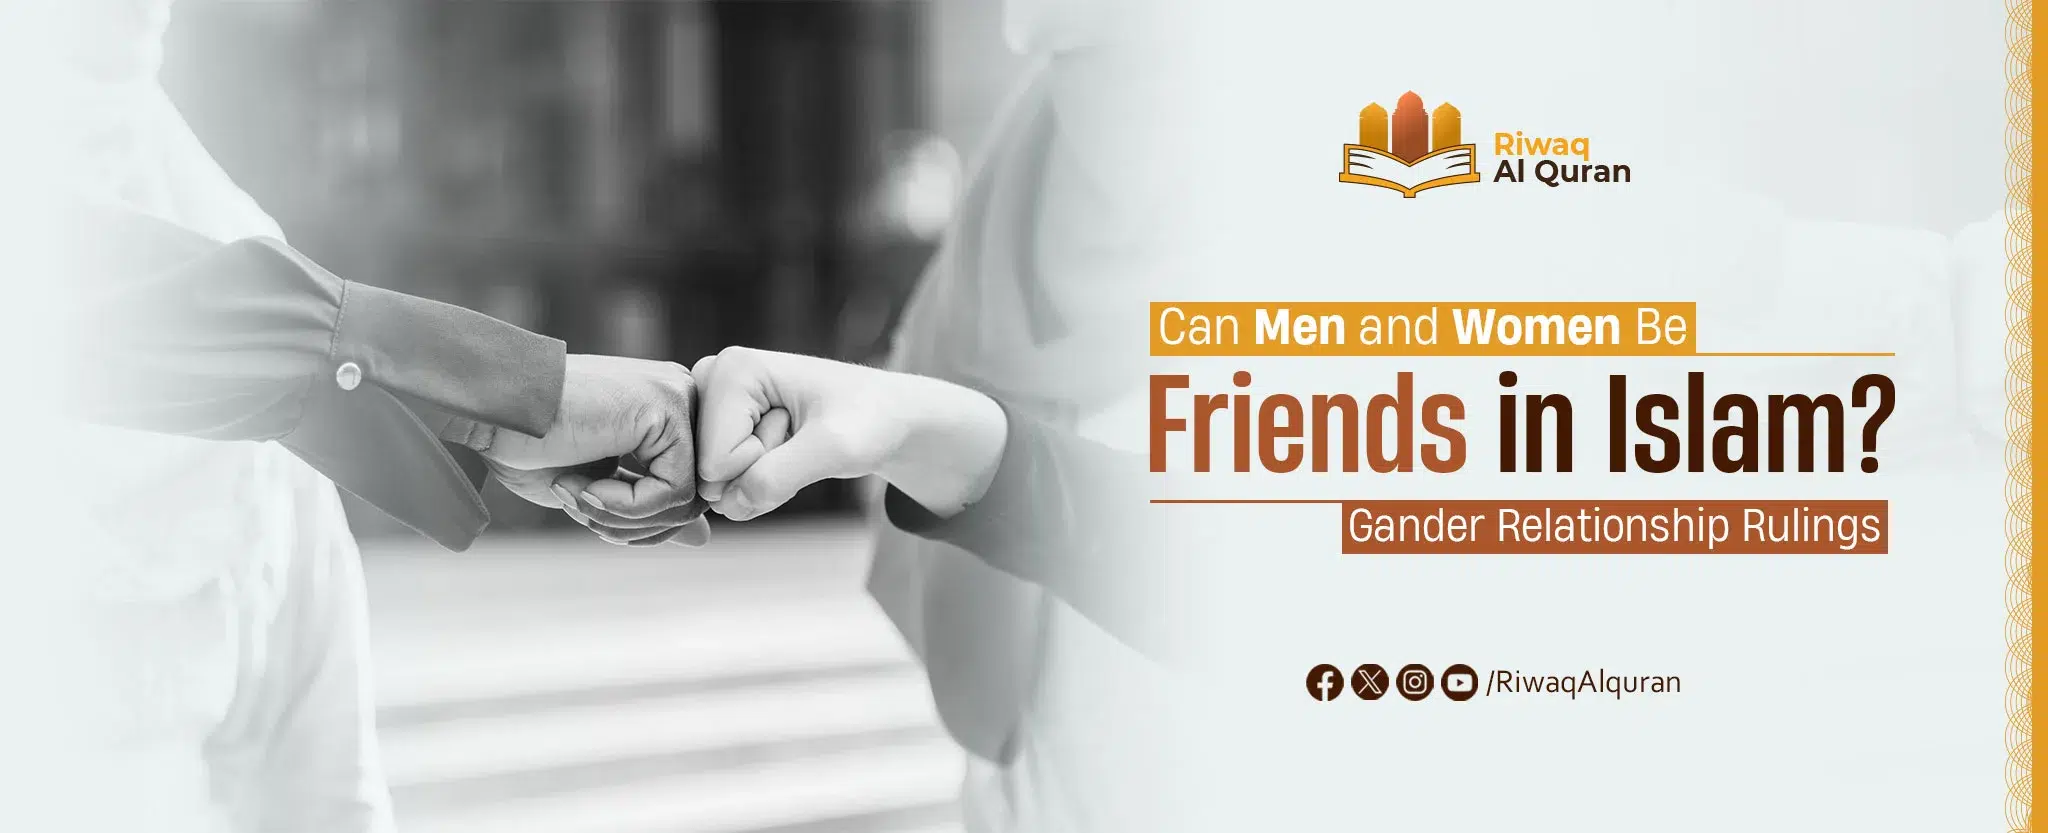 Can Men and Women Be Friends in Islam? Gander Relationship Rulings